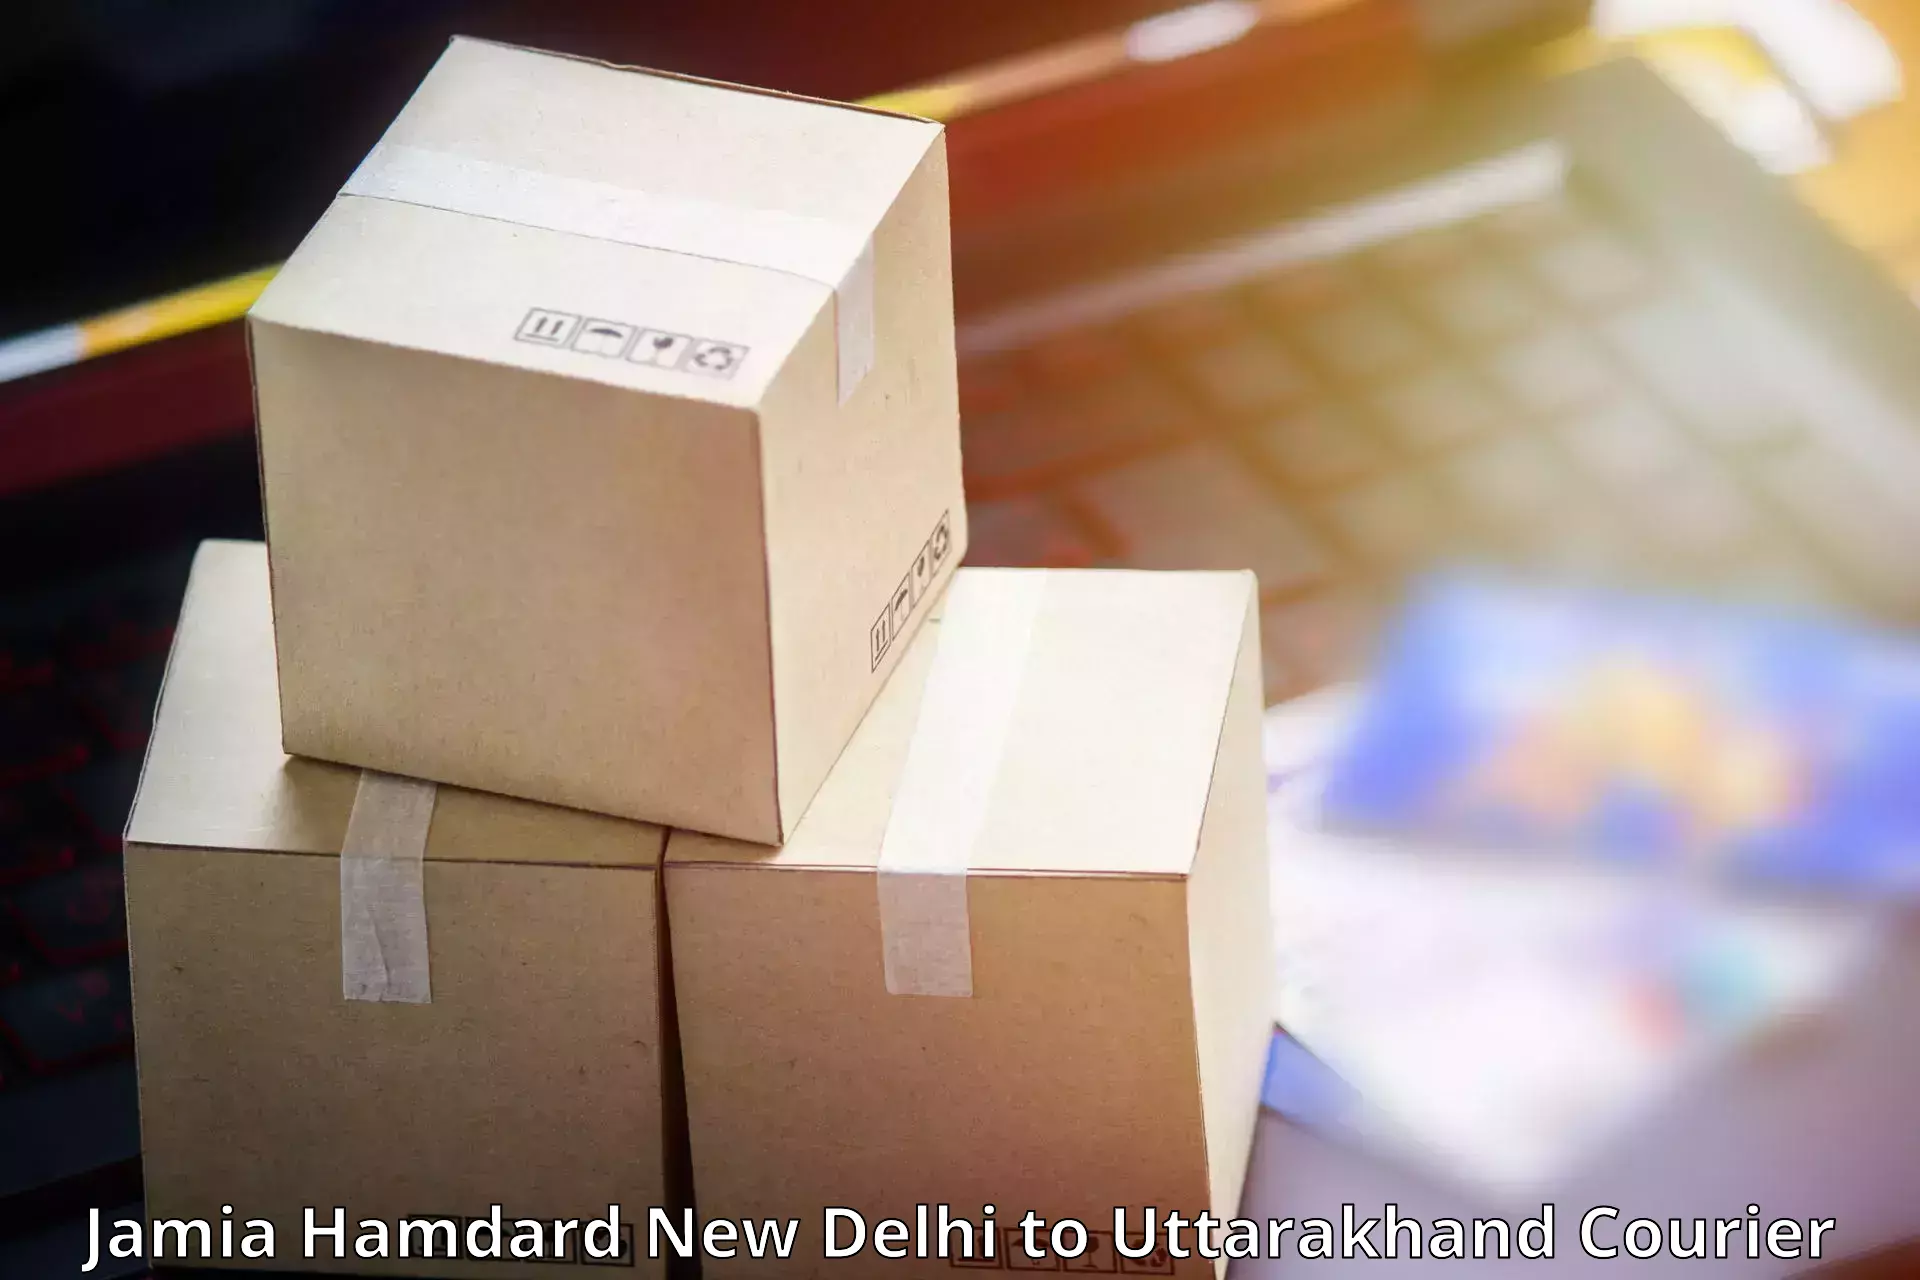 Affordable parcel service Jamia Hamdard New Delhi to Lohaghat